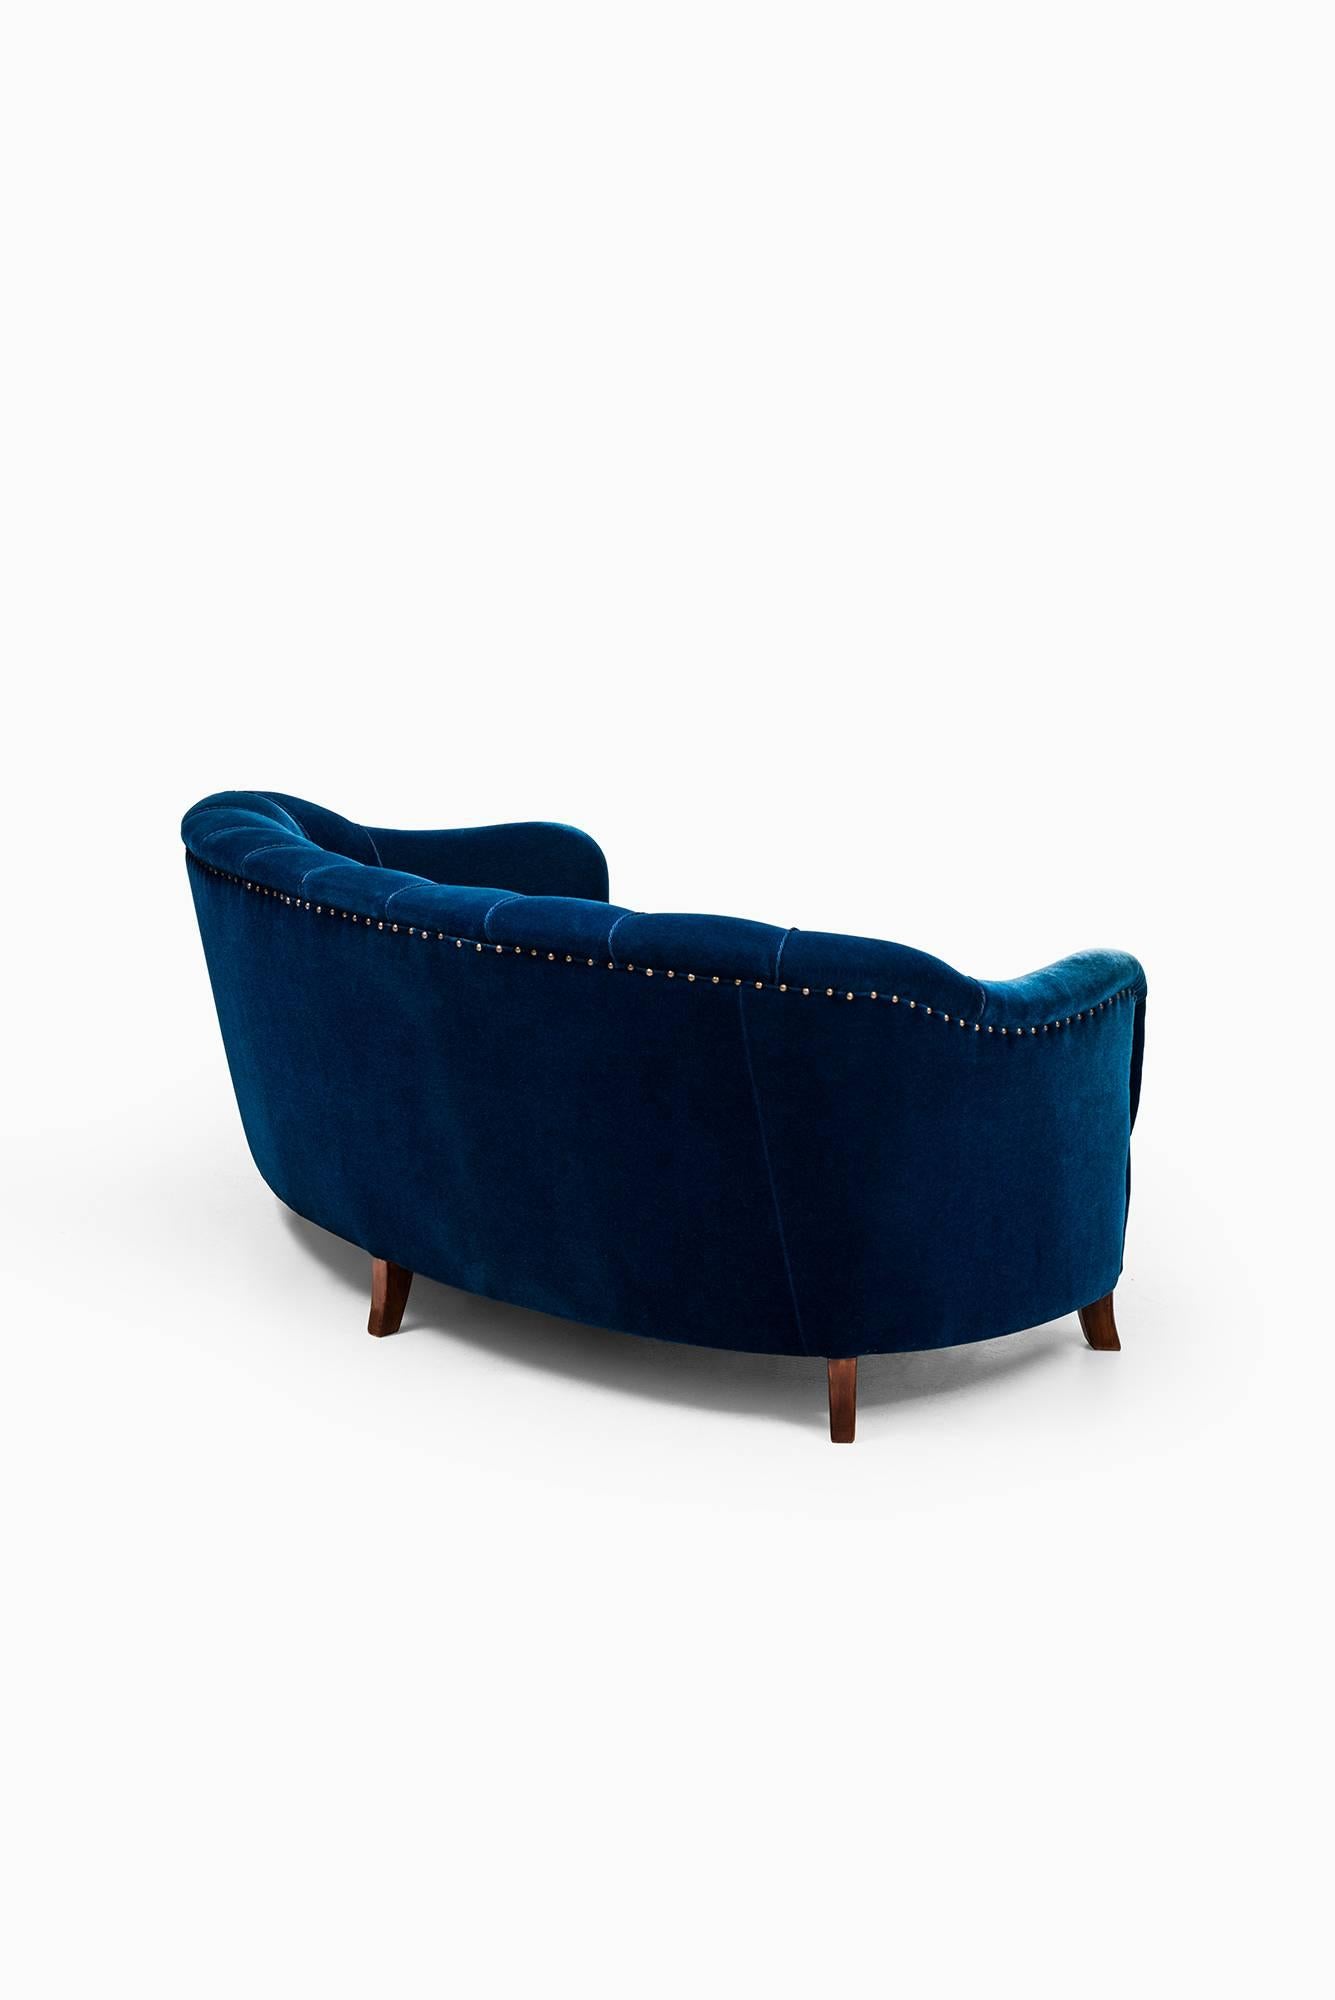 Mid-20th Century Curved Sofa in Blue Velvet Attributed to Otto Schulz